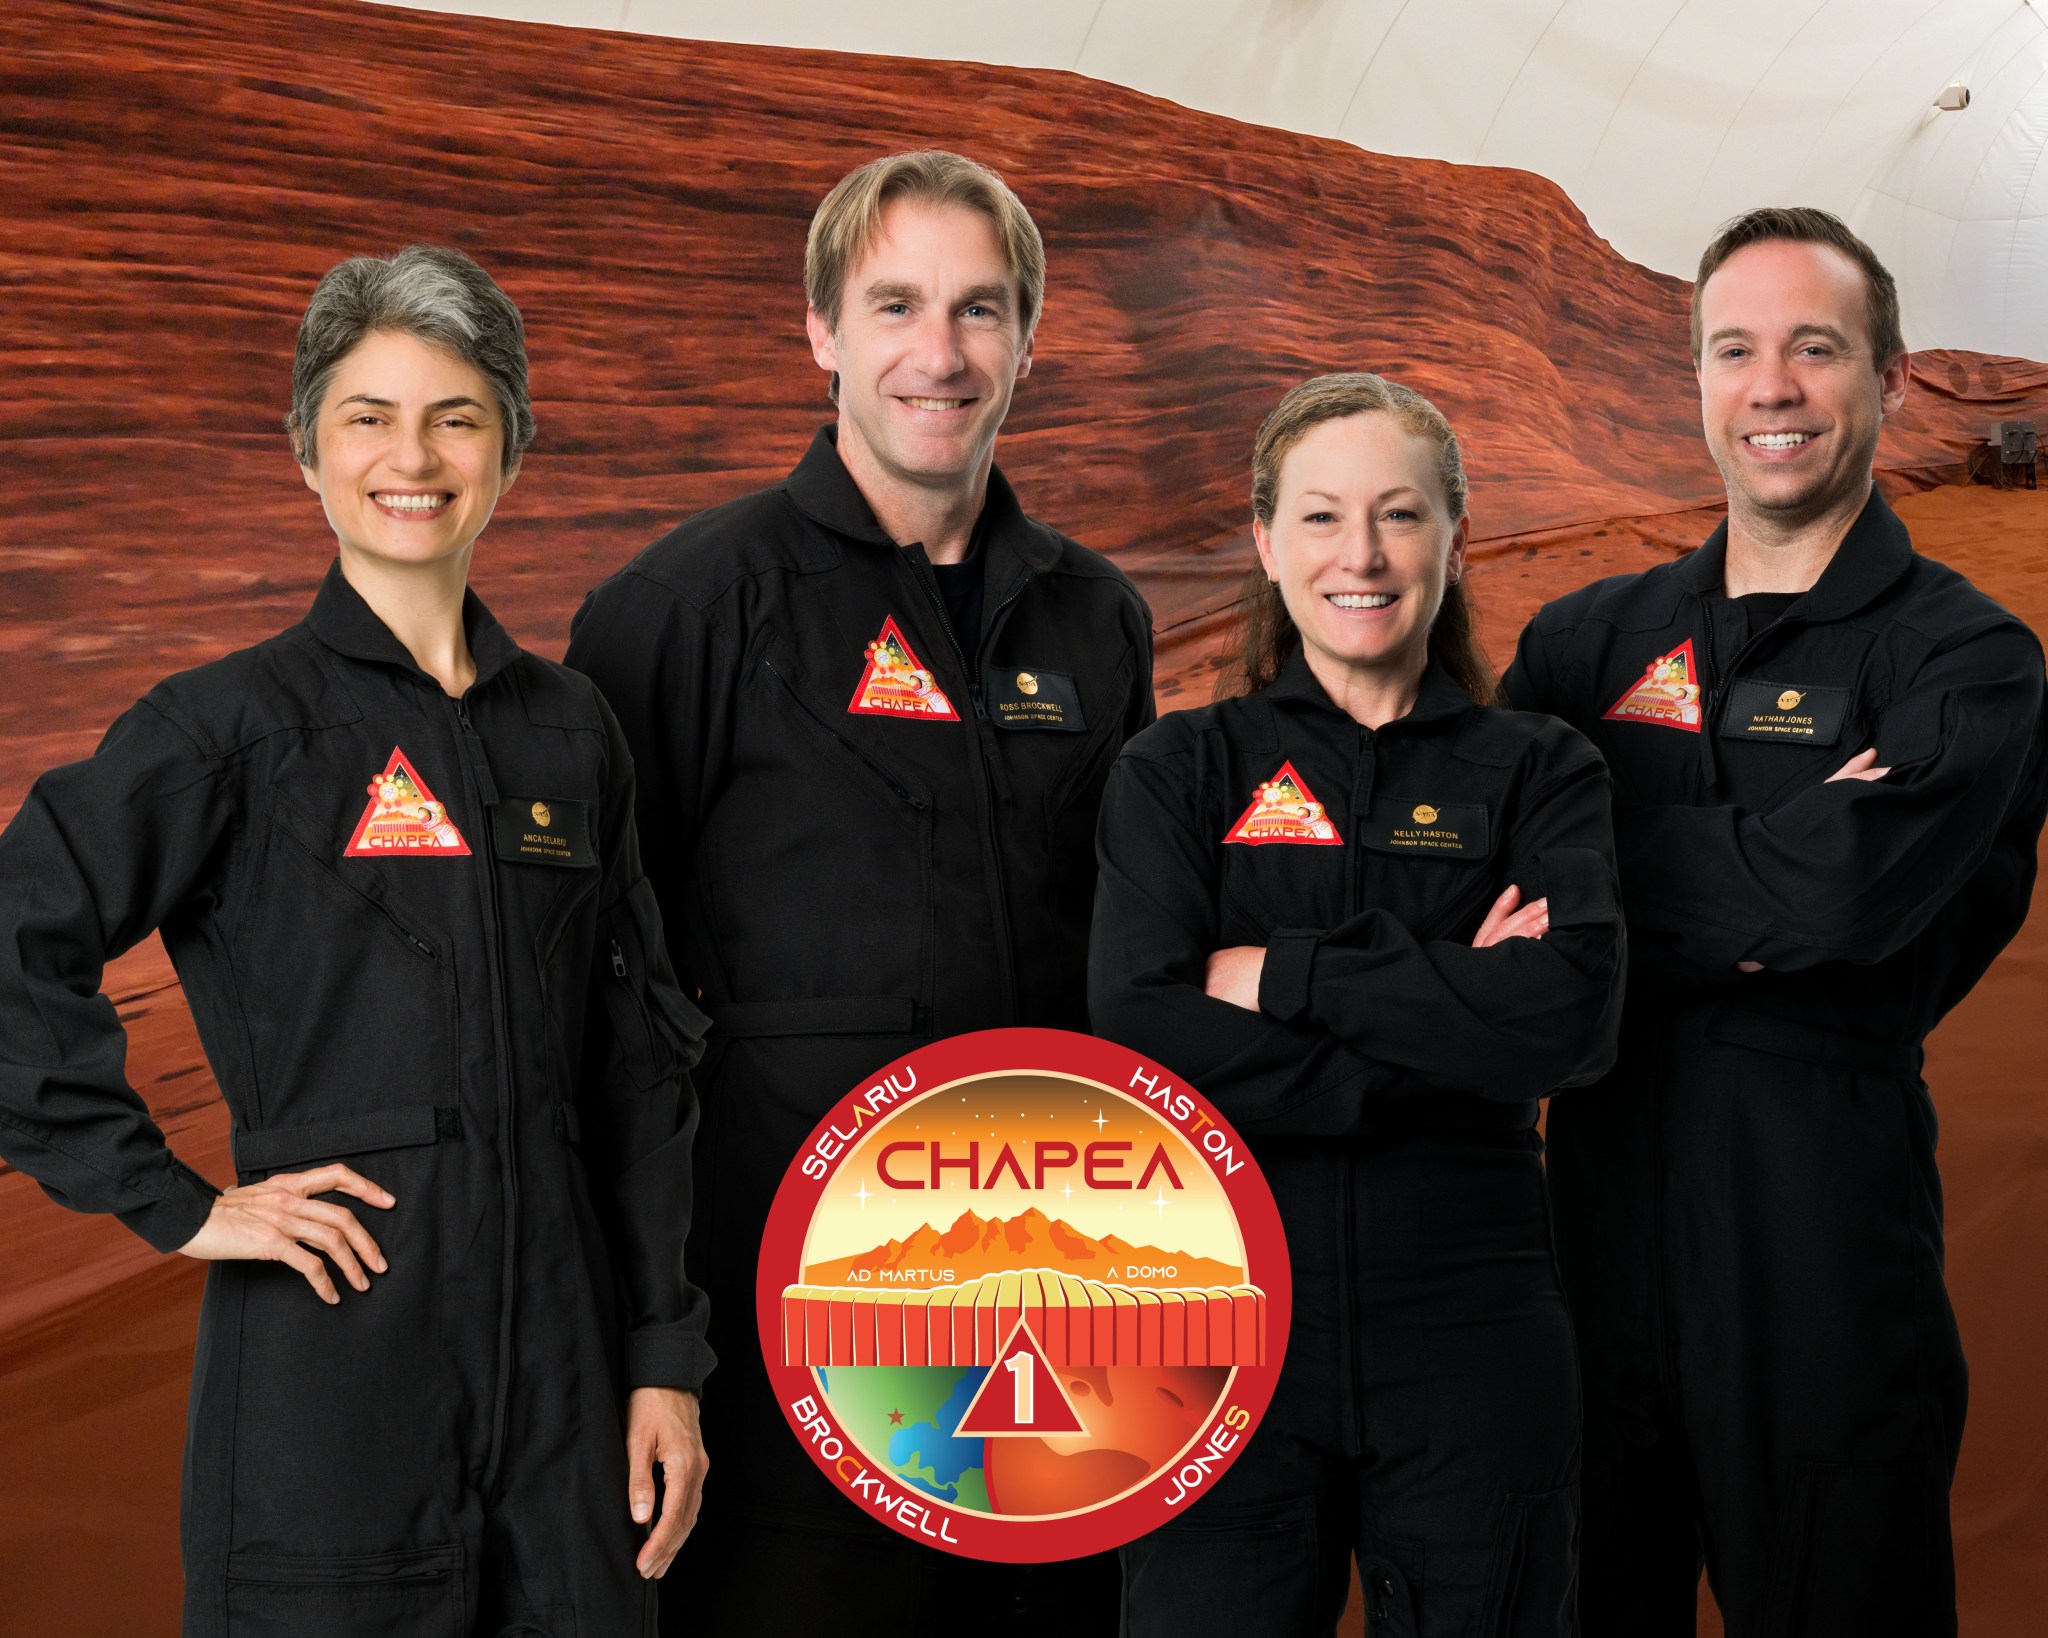 Official CHAPEA mission 1 crew portrait (from left to right: Anca Selariu, Ross Brockwell, Kelly Haston, Nathan Jones).